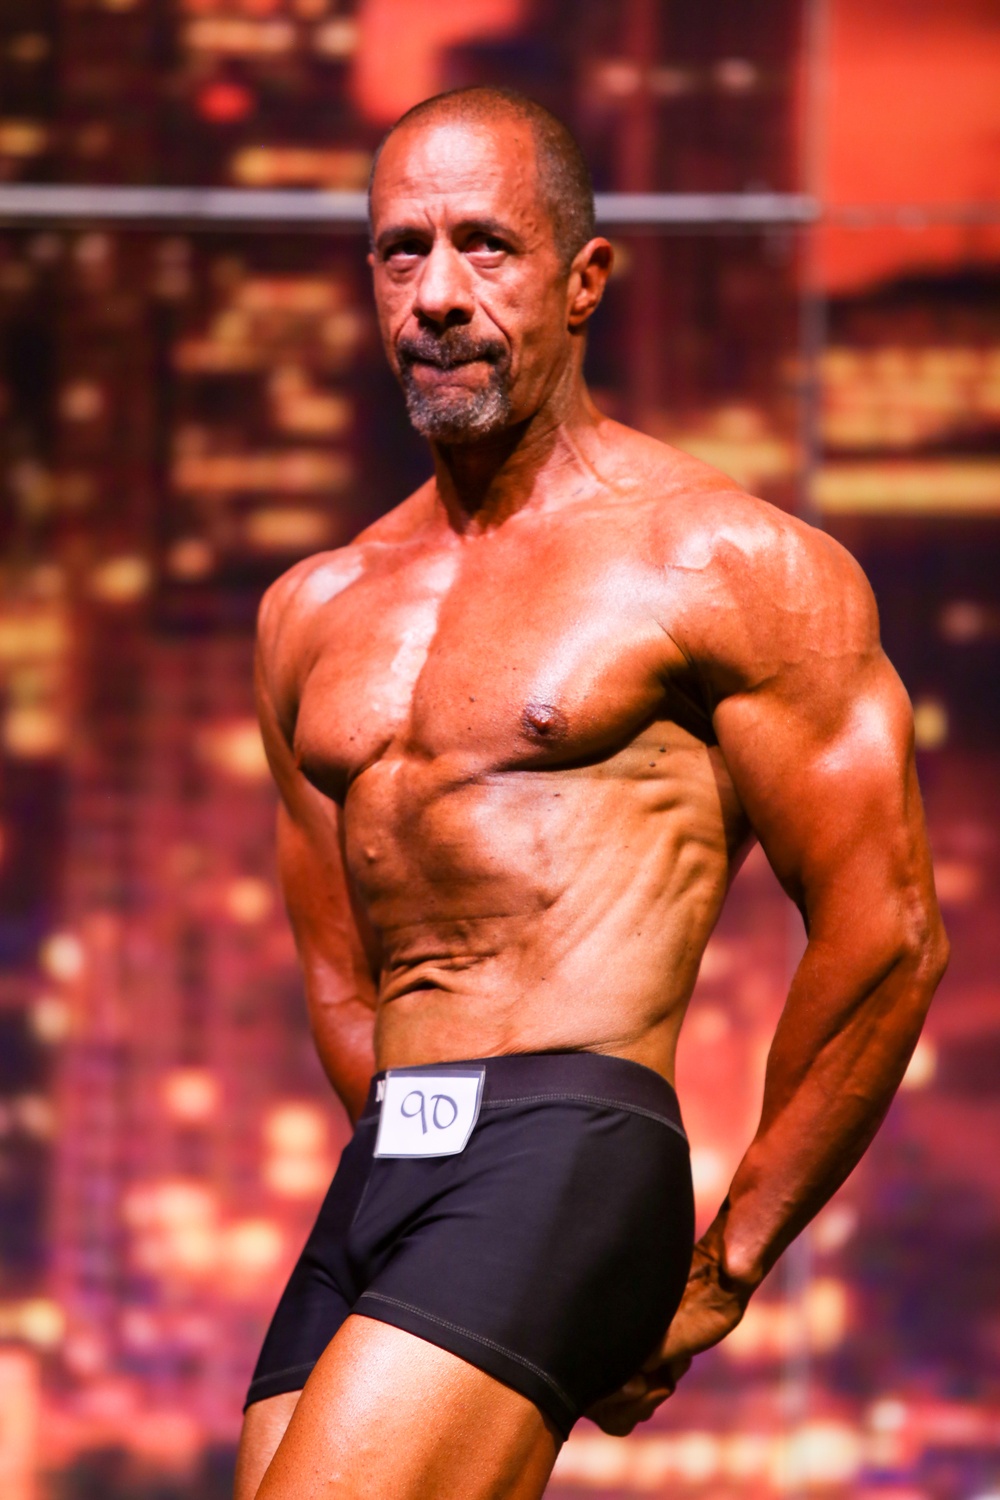 WADS member places 1st at bodybuilding competition